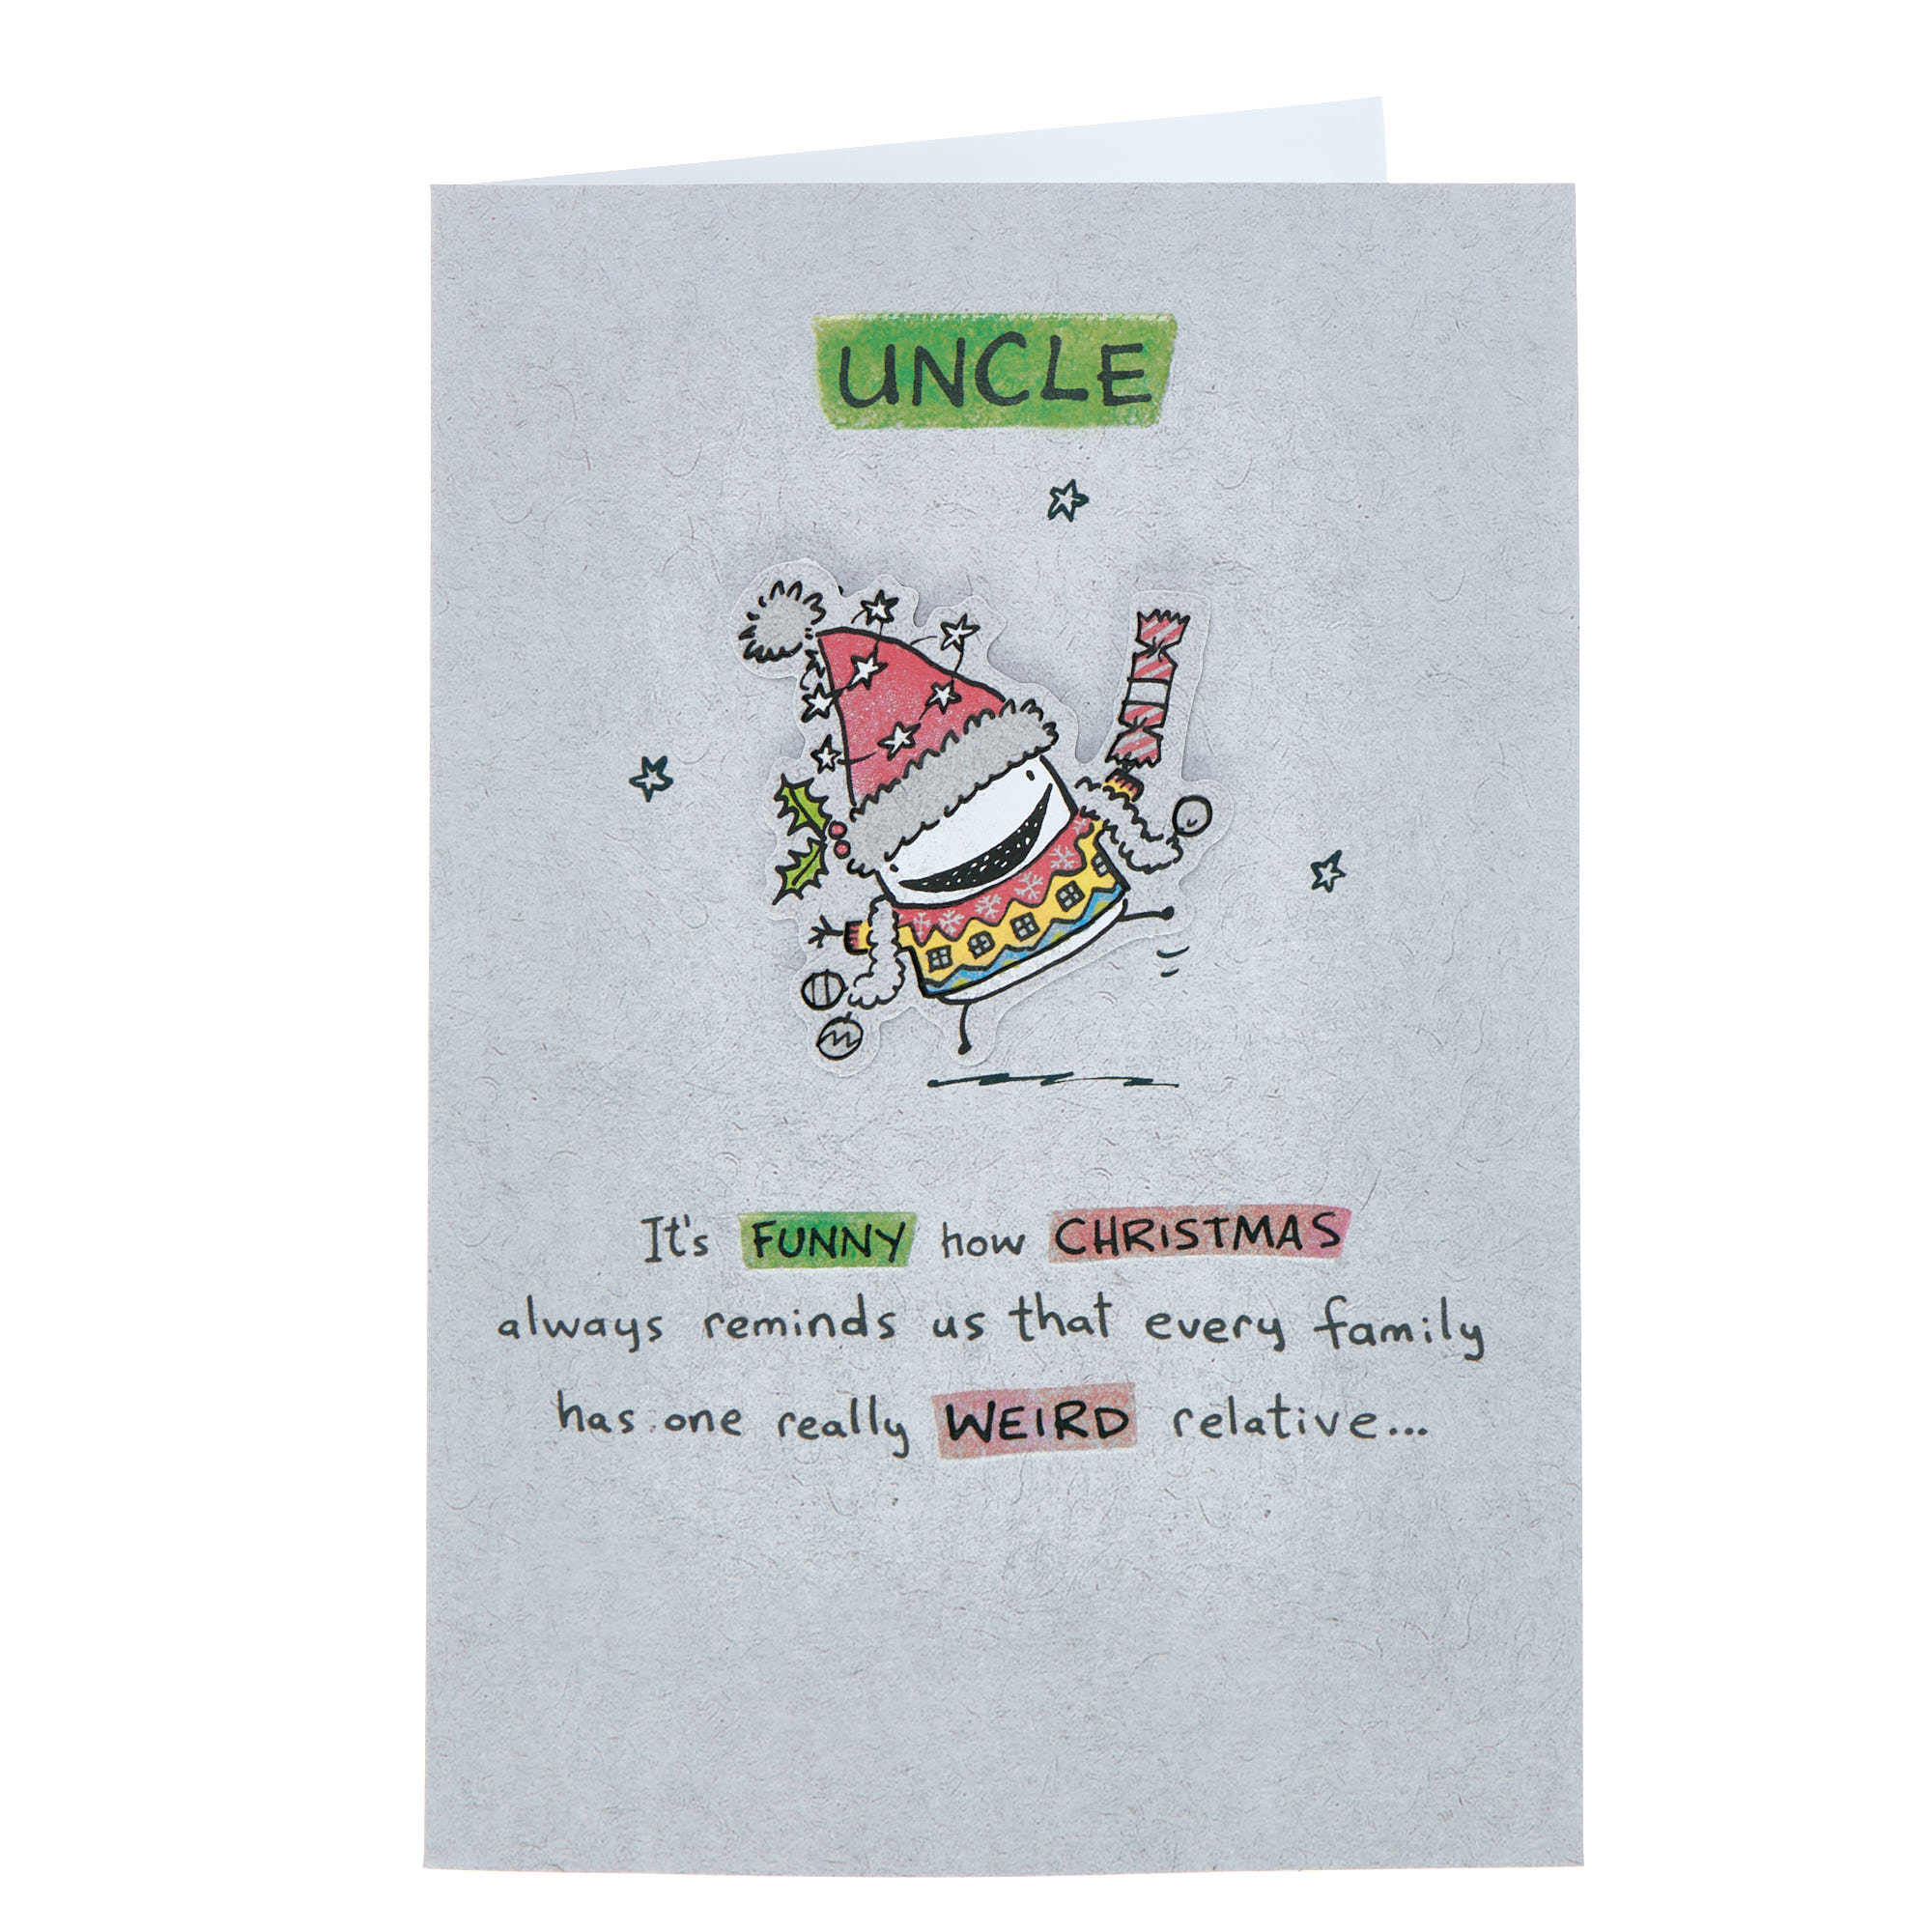 Uncle One Weird Relative Christmas Card